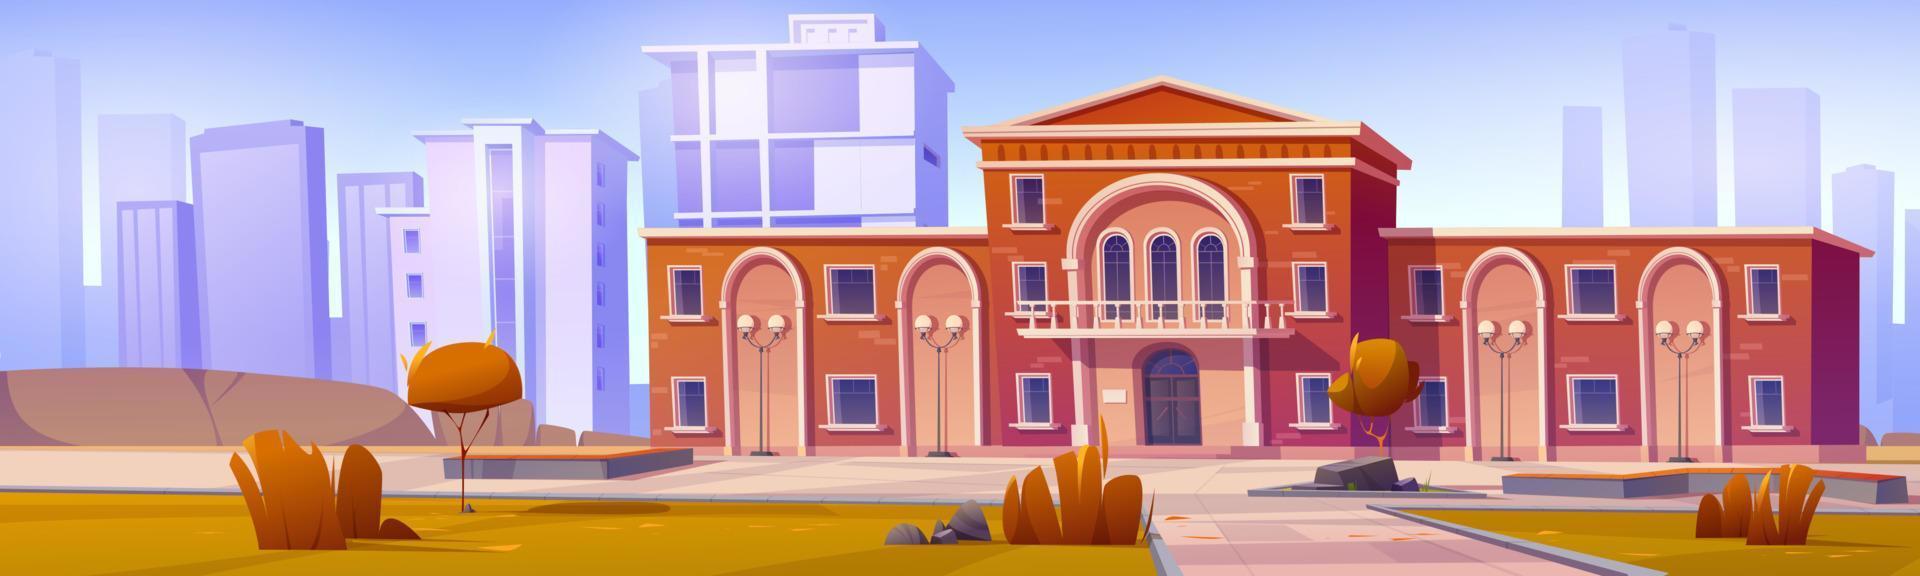 University or public library building in city vector